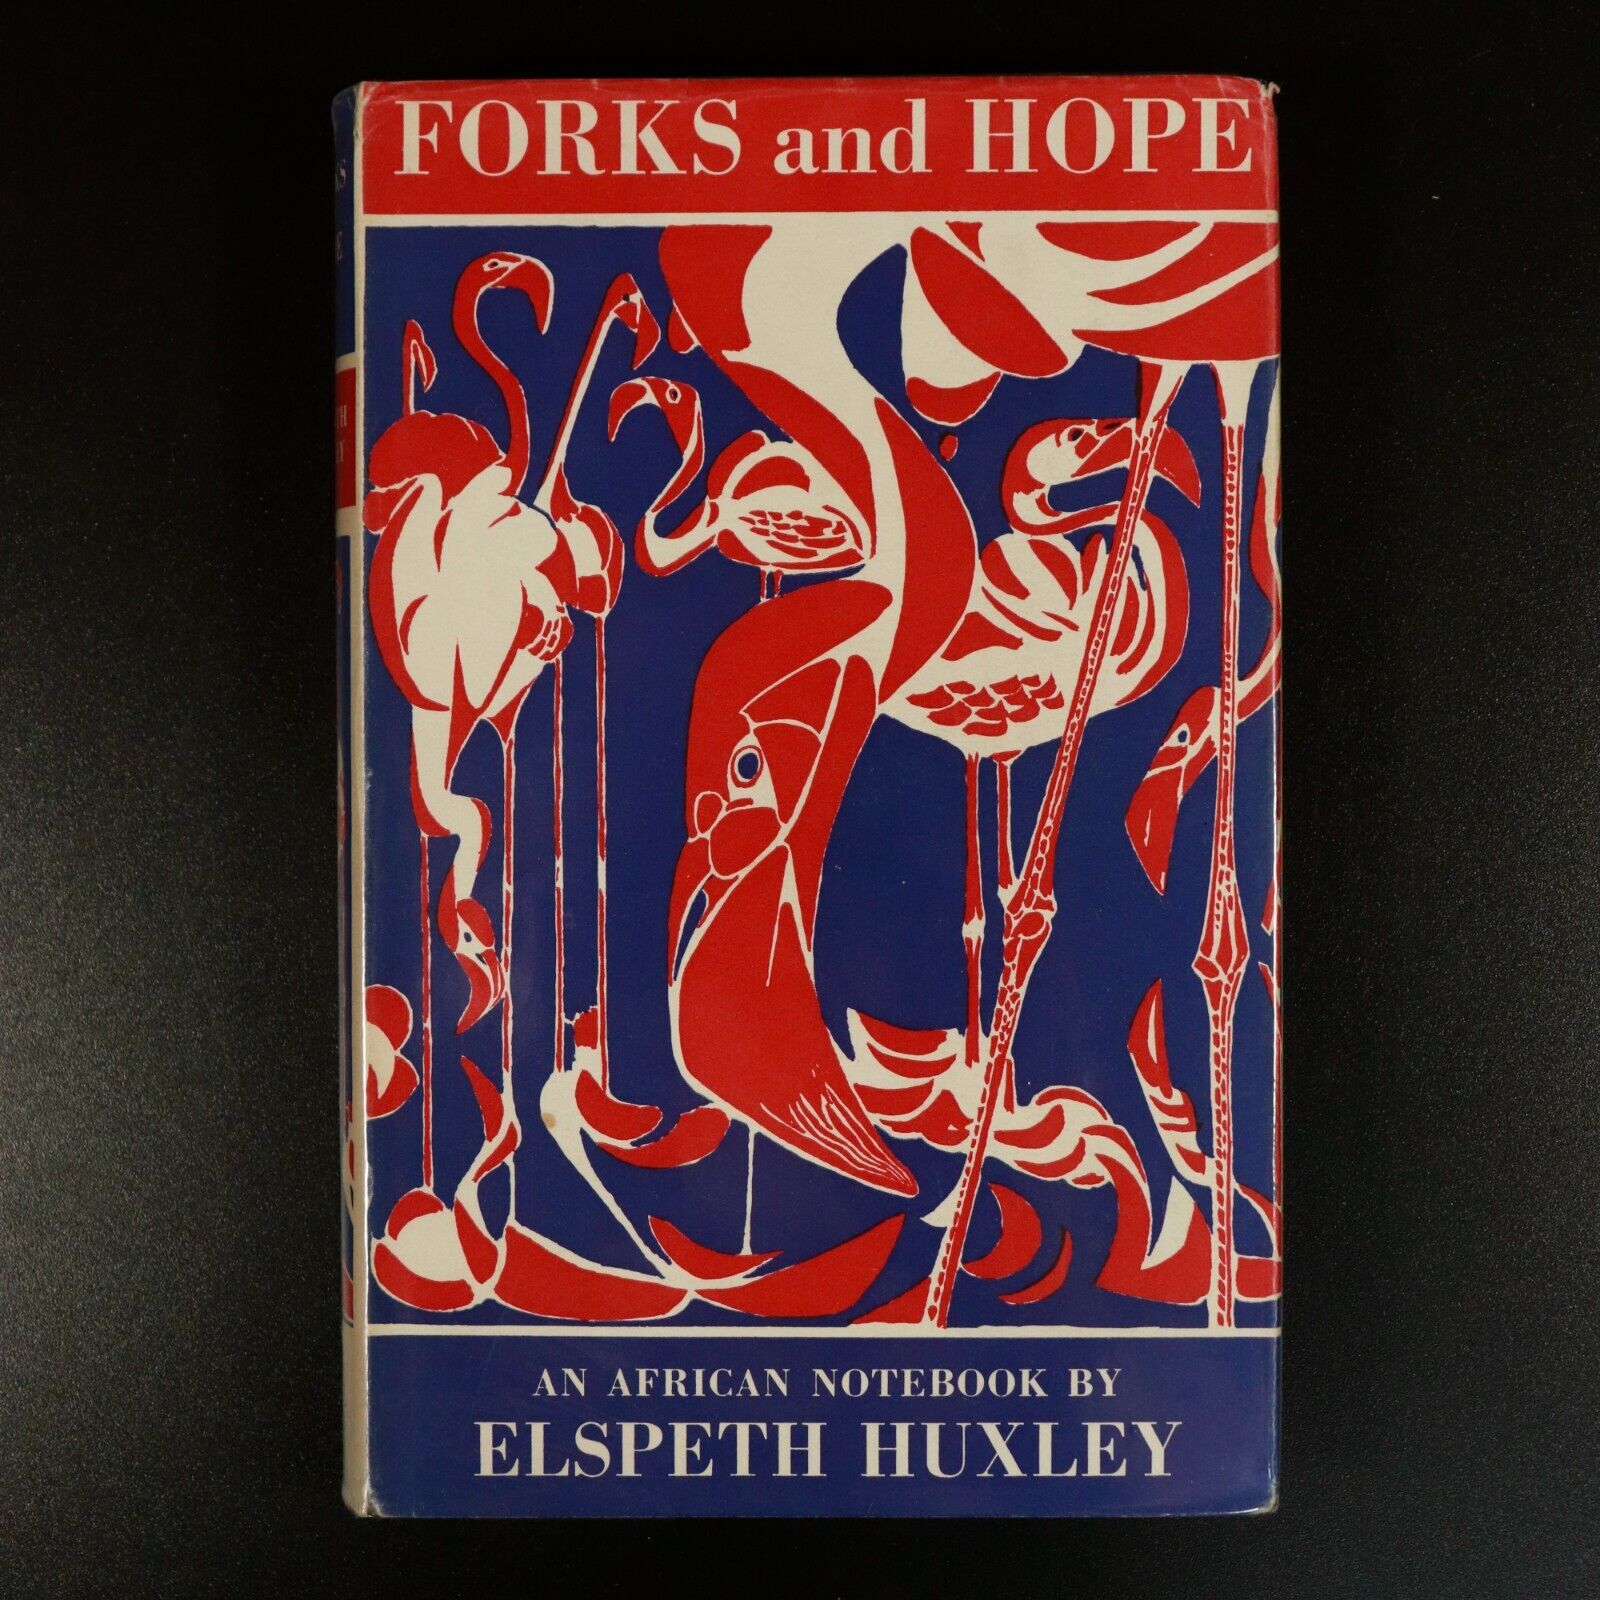 1964 Forks & Hope An African Notebook by Elspeth Huxley African History Book